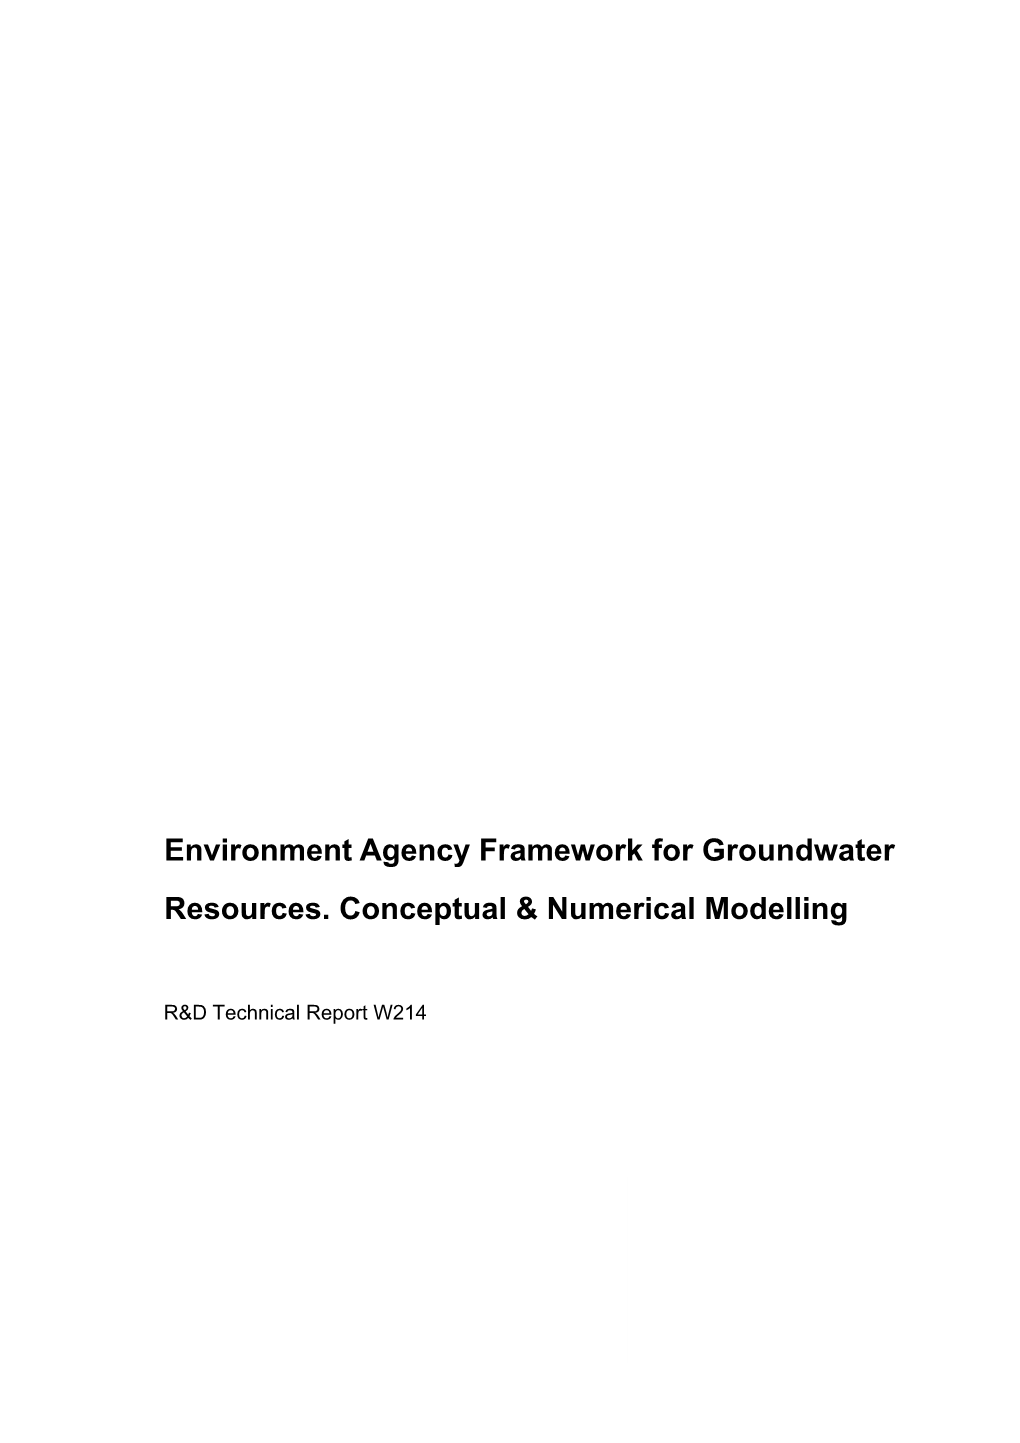 Environment Agency Framework for Groundwater Resources